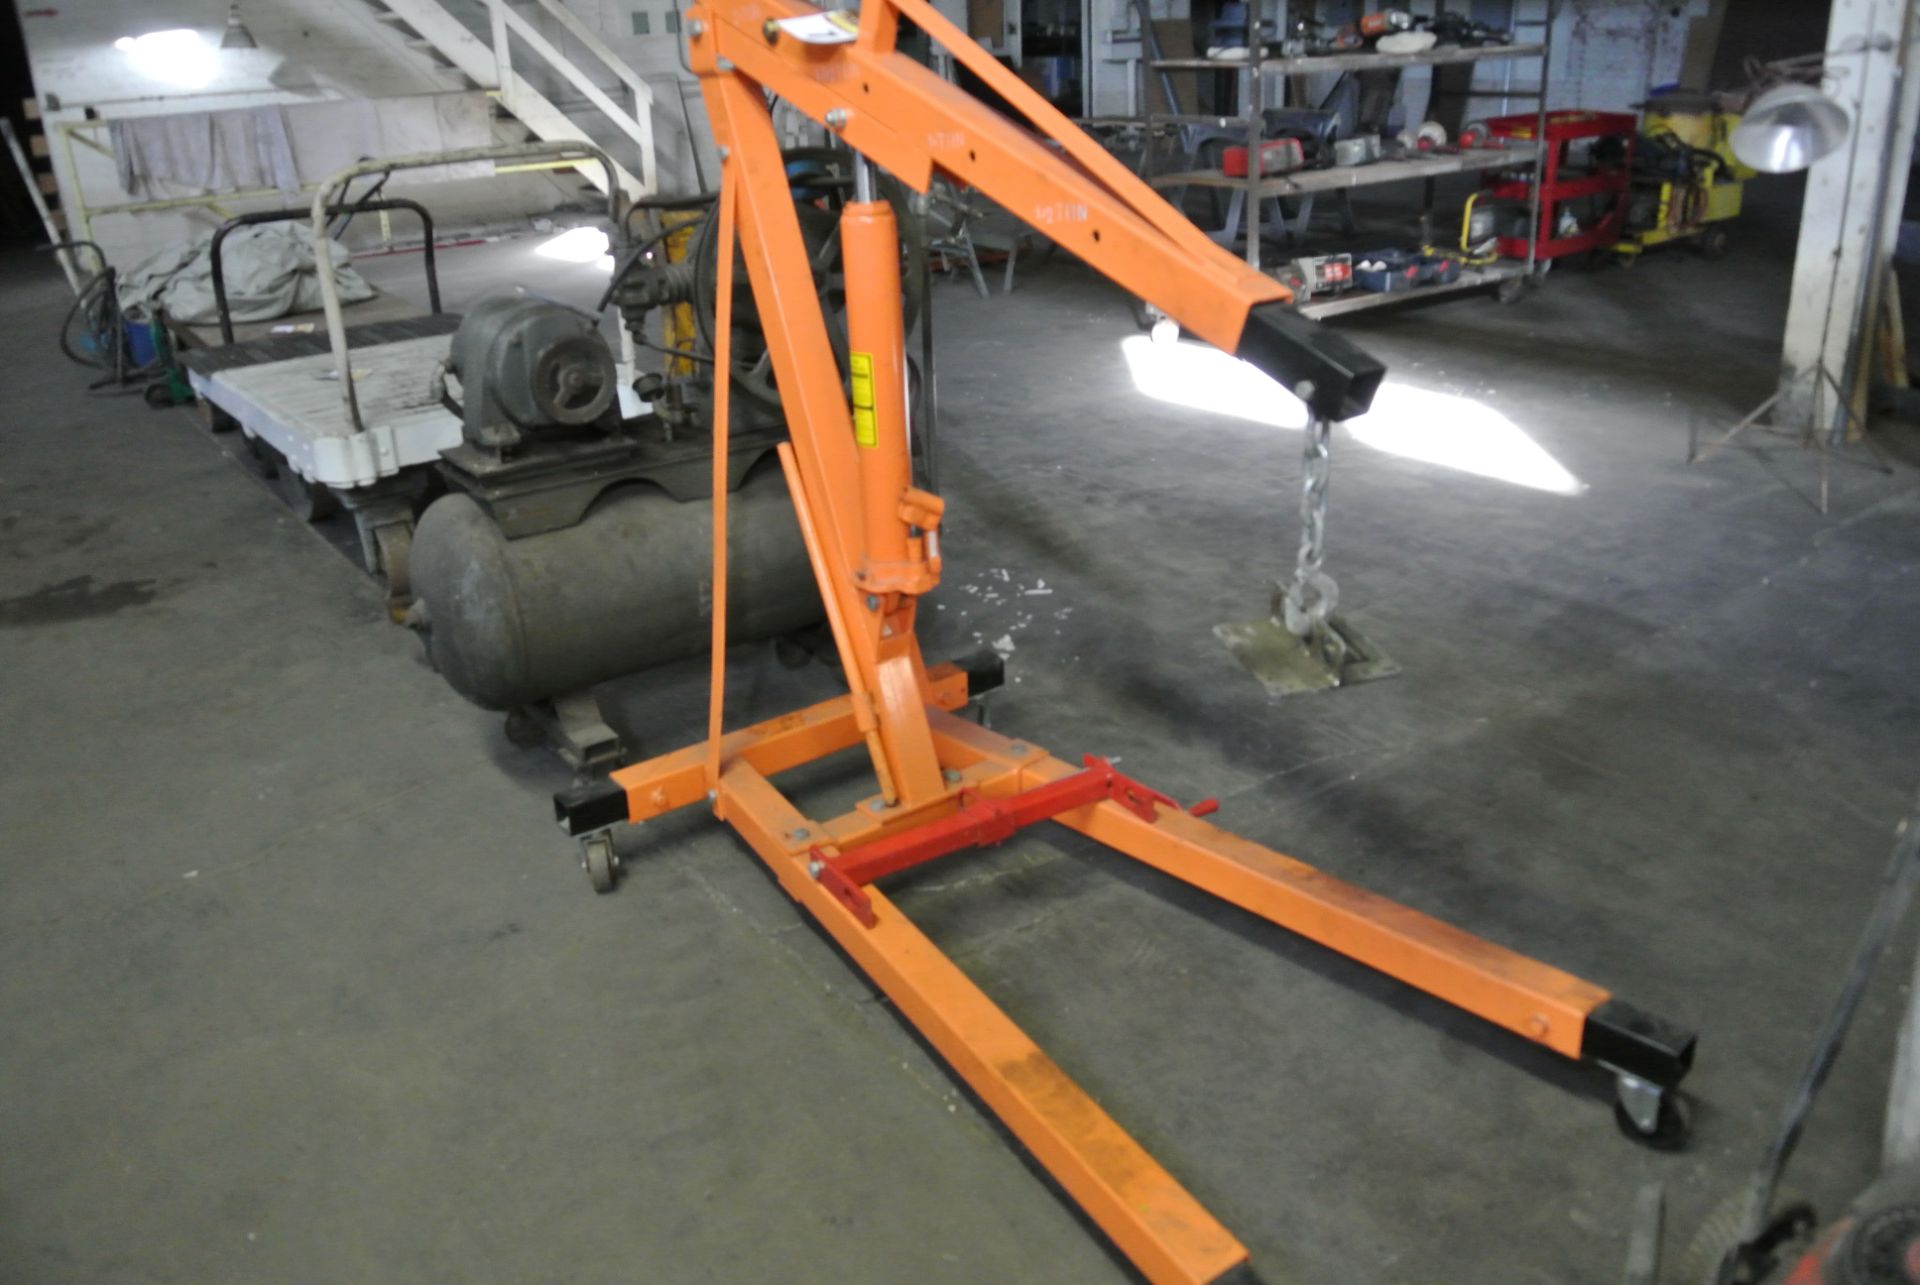 Central Hydraulics 2 Ton Engine Hoist with lift adapter and load leveler.